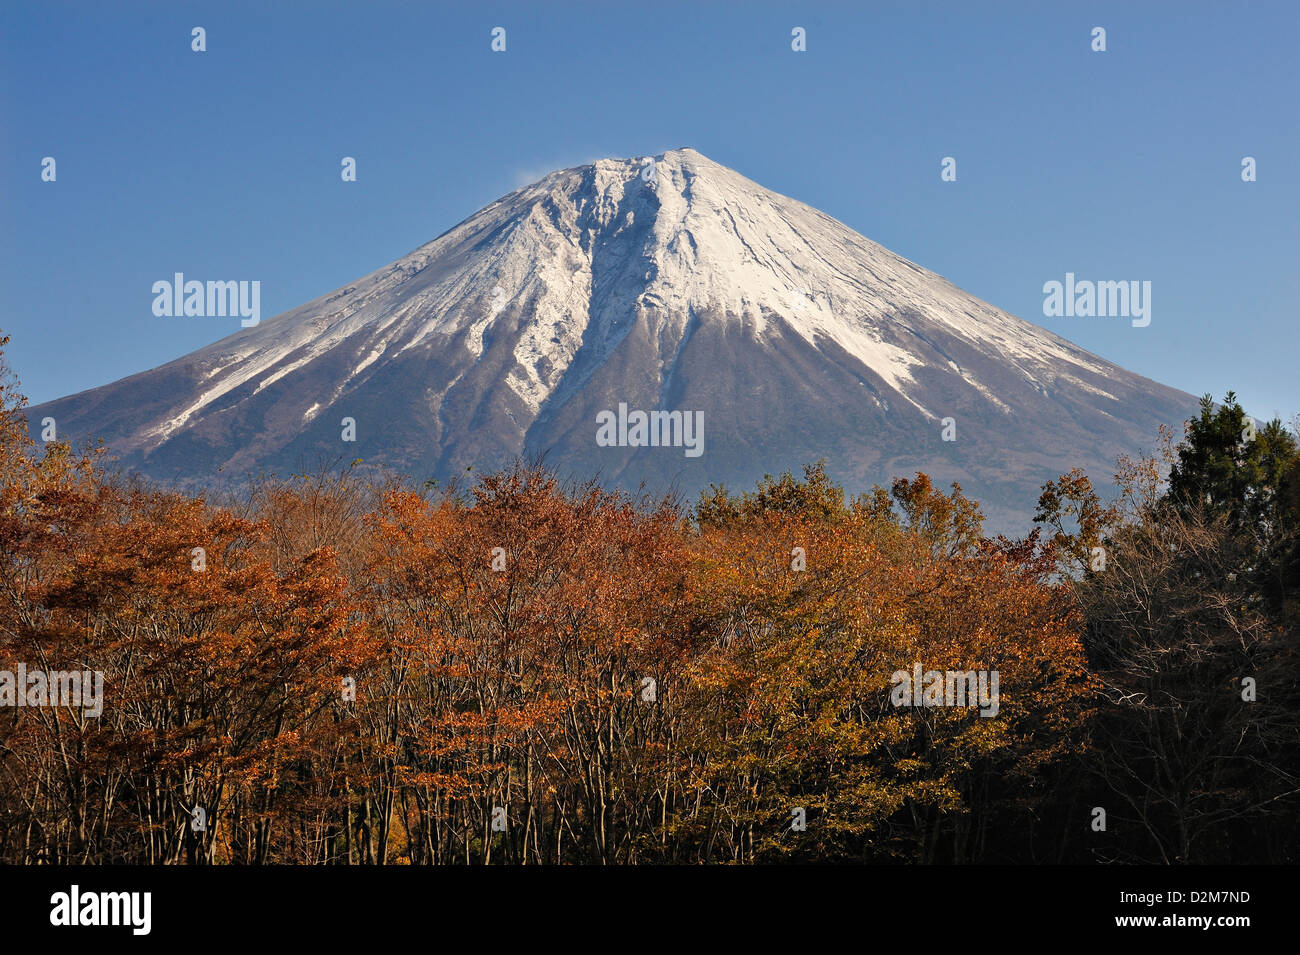 Snow-capped Mount Fuji above a screen of trees, Japan Stock Photo